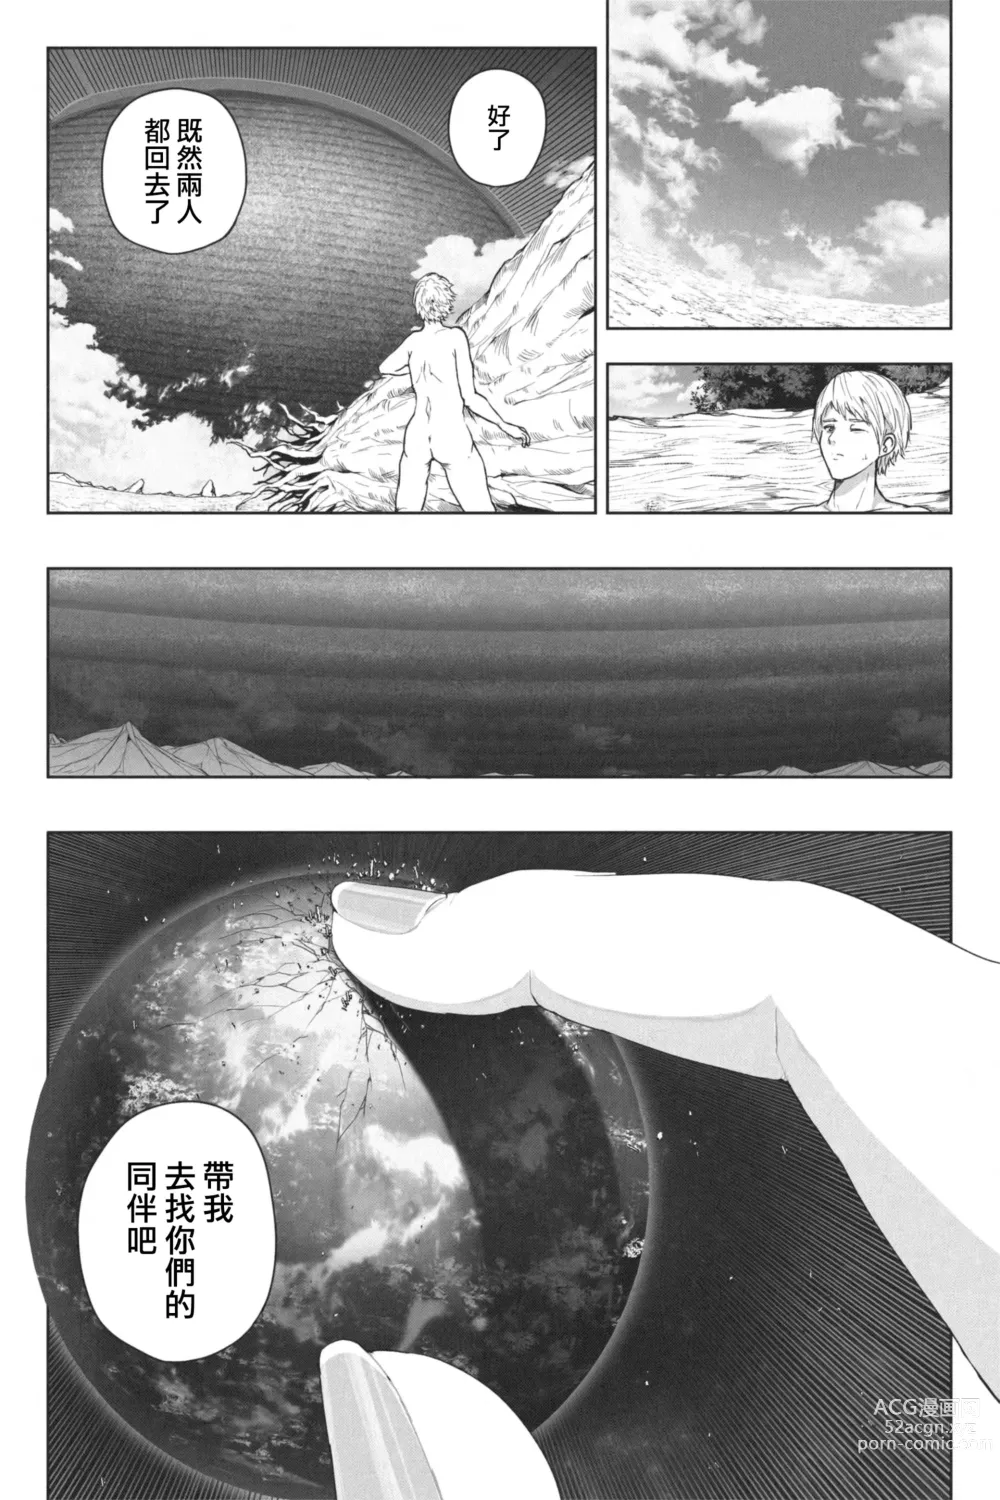 Page 18 of doujinshi NEW Chikyuu de Asobo - NEW Play with earth